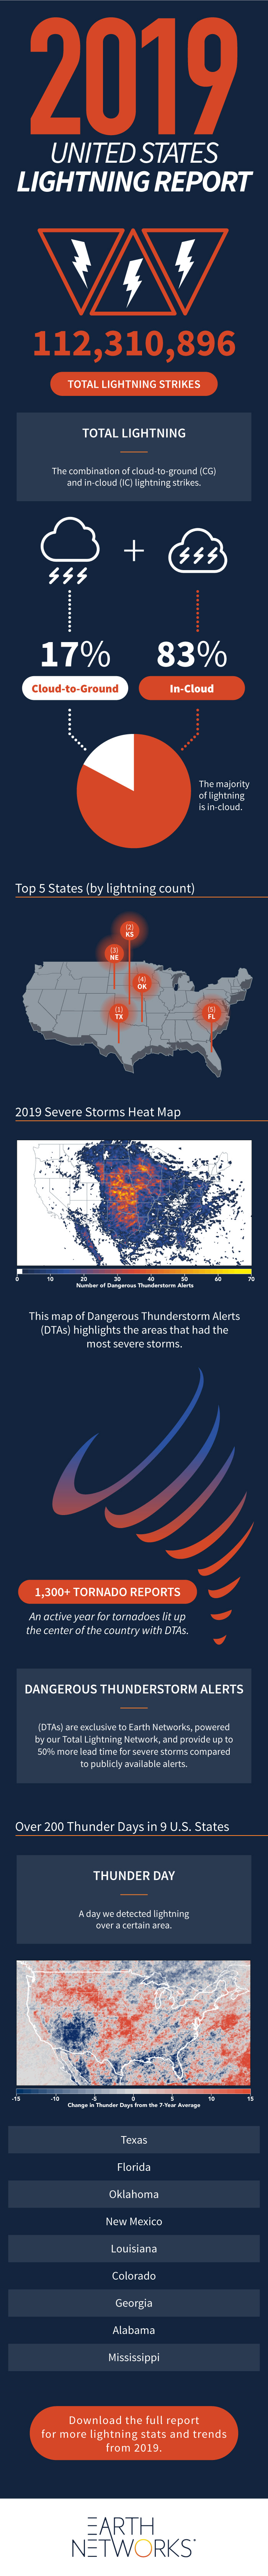 2019 U.S. Lightning Report Infographic | Earth Networks